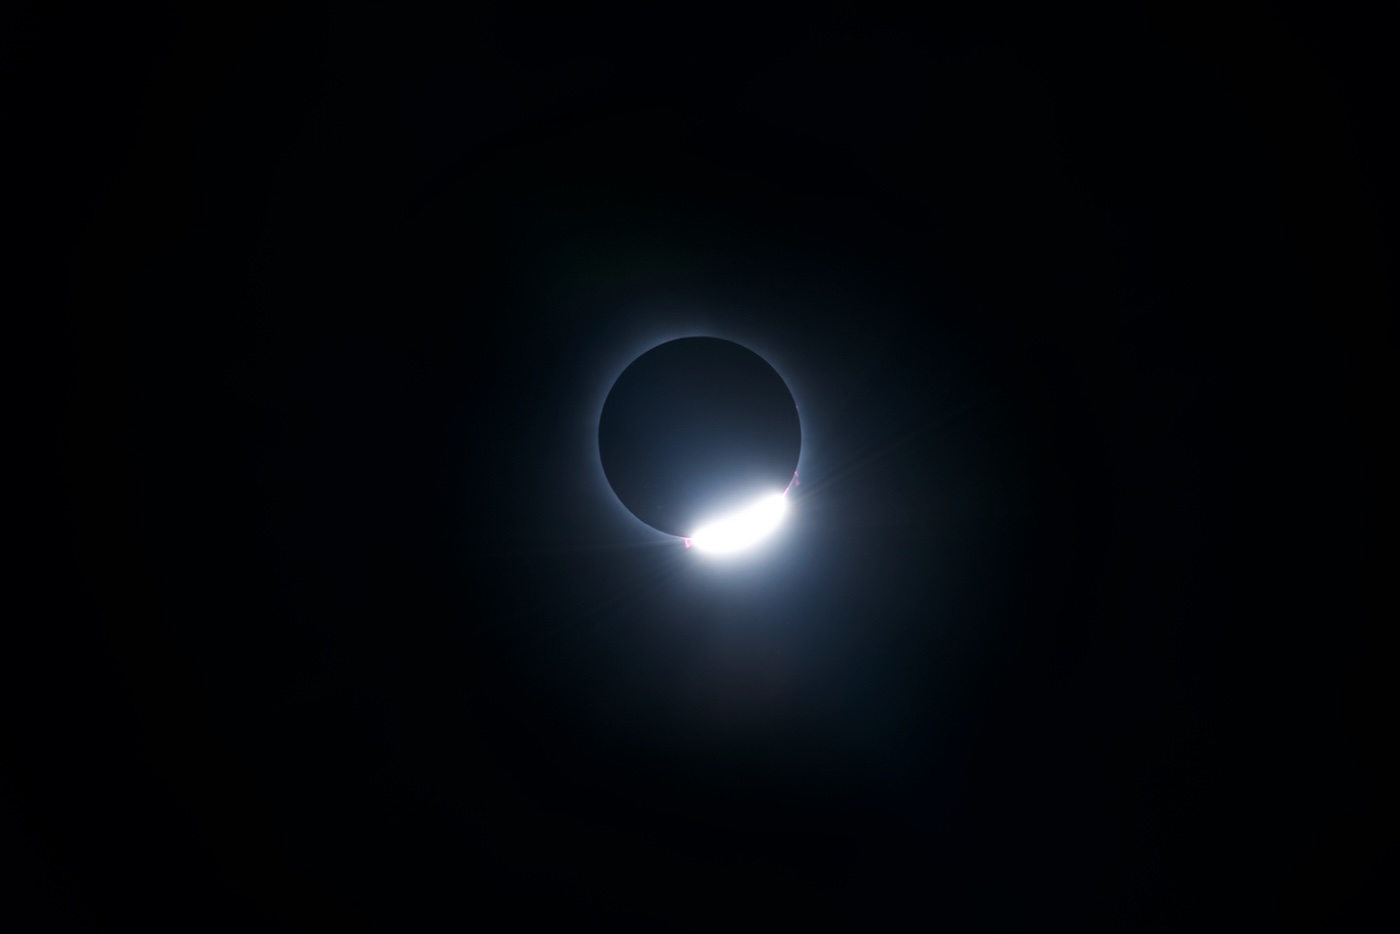 2024 Eclipse - Totality with diamond ring and prominences